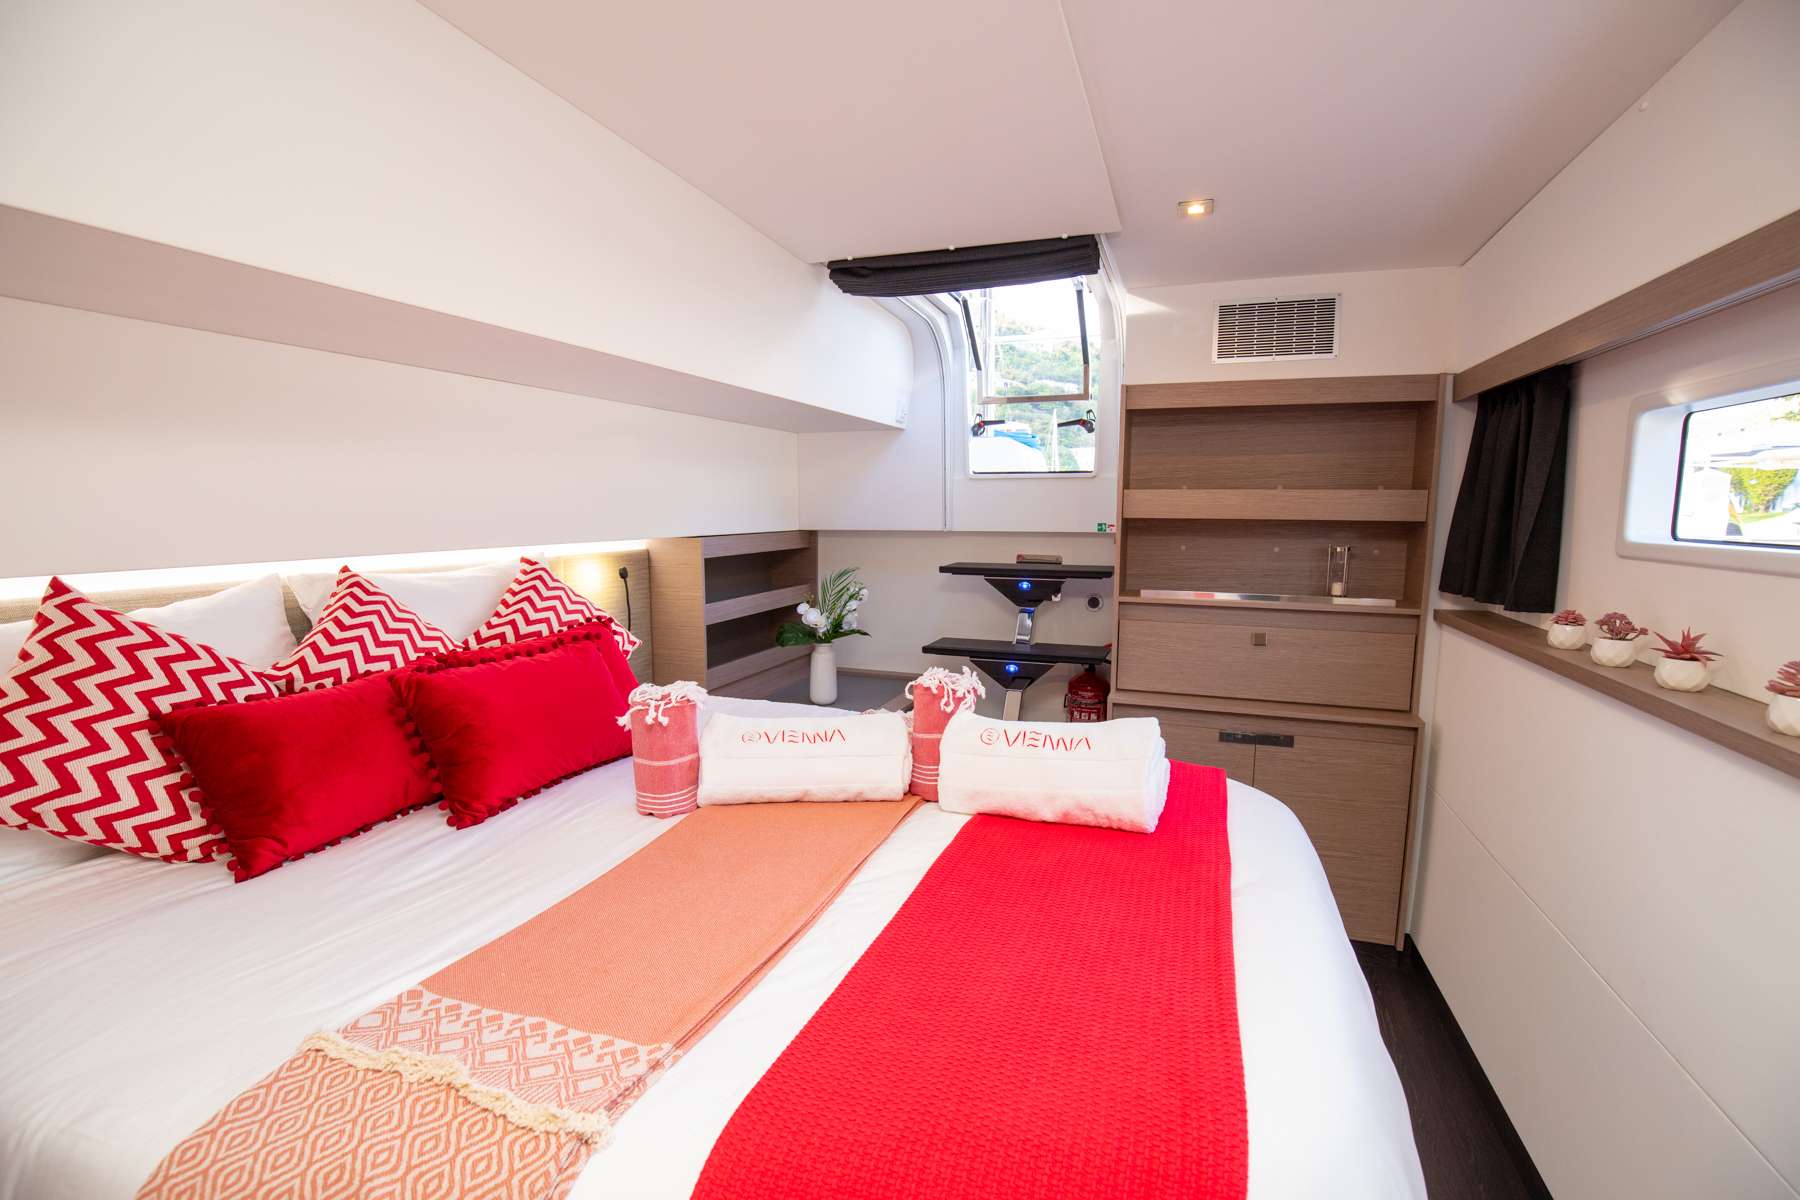 VIENNA Yacht Charter - Primary Cabin, with queen bed